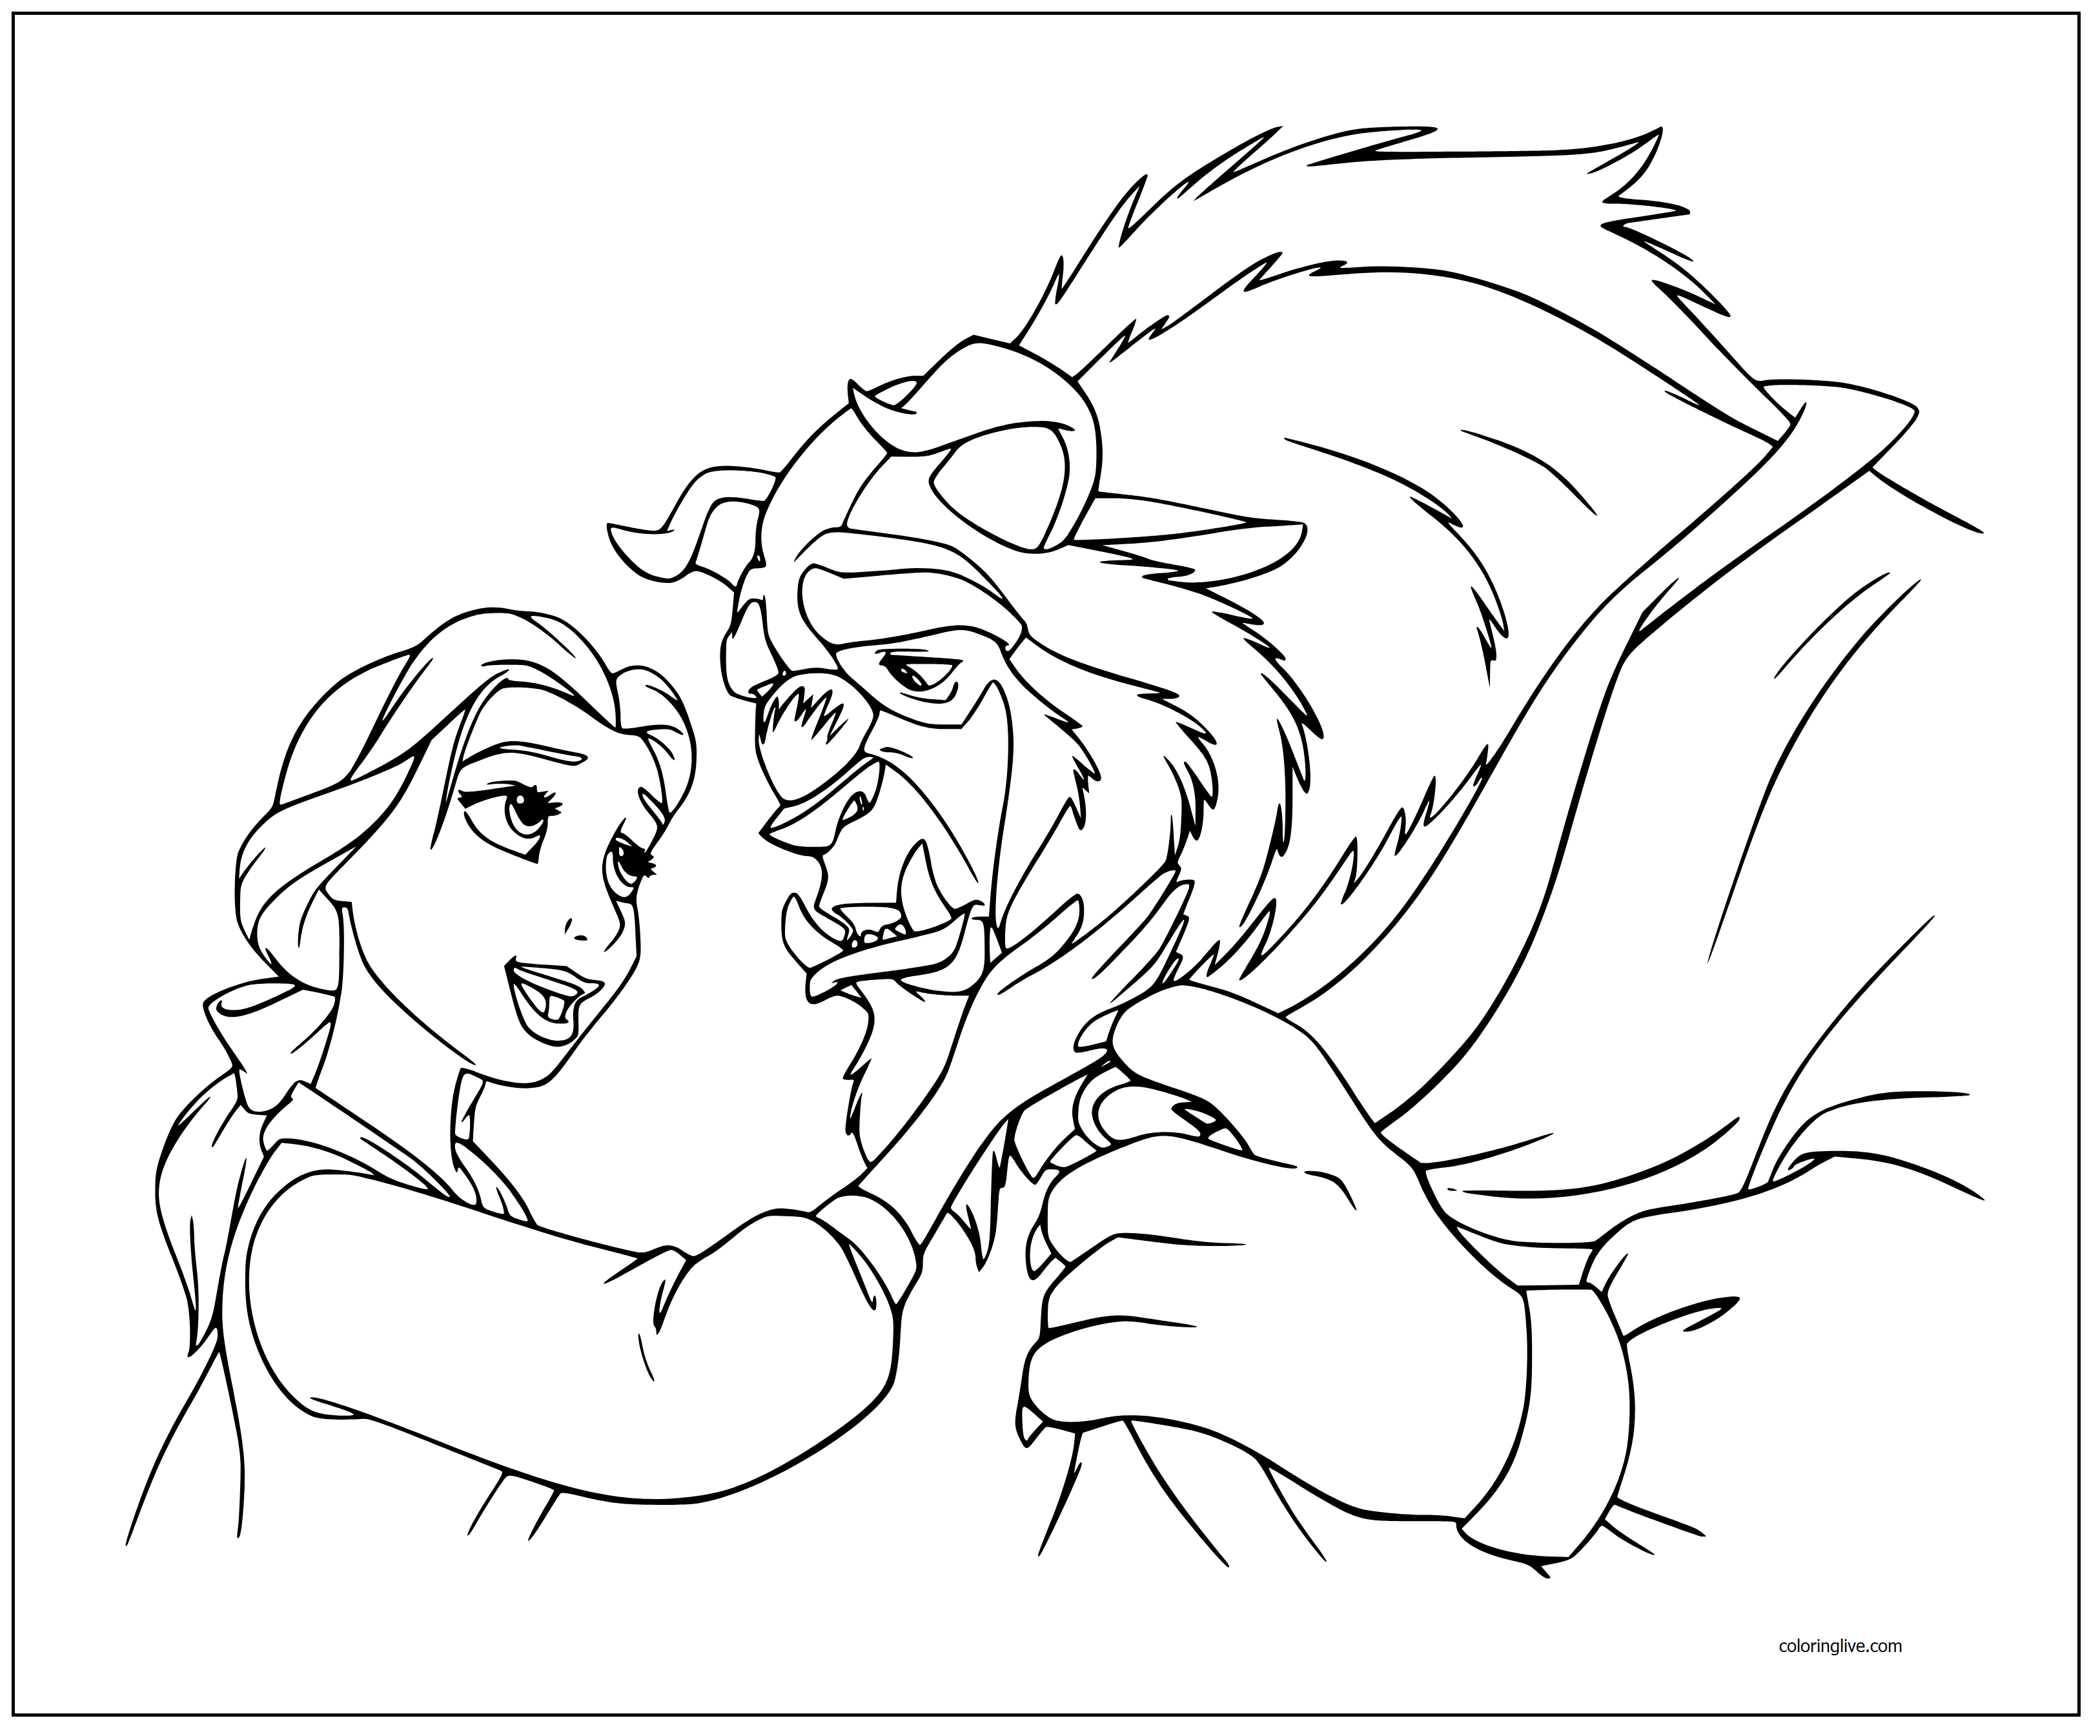 Printable Beauty and the Beast   71 Coloring Page for kids.